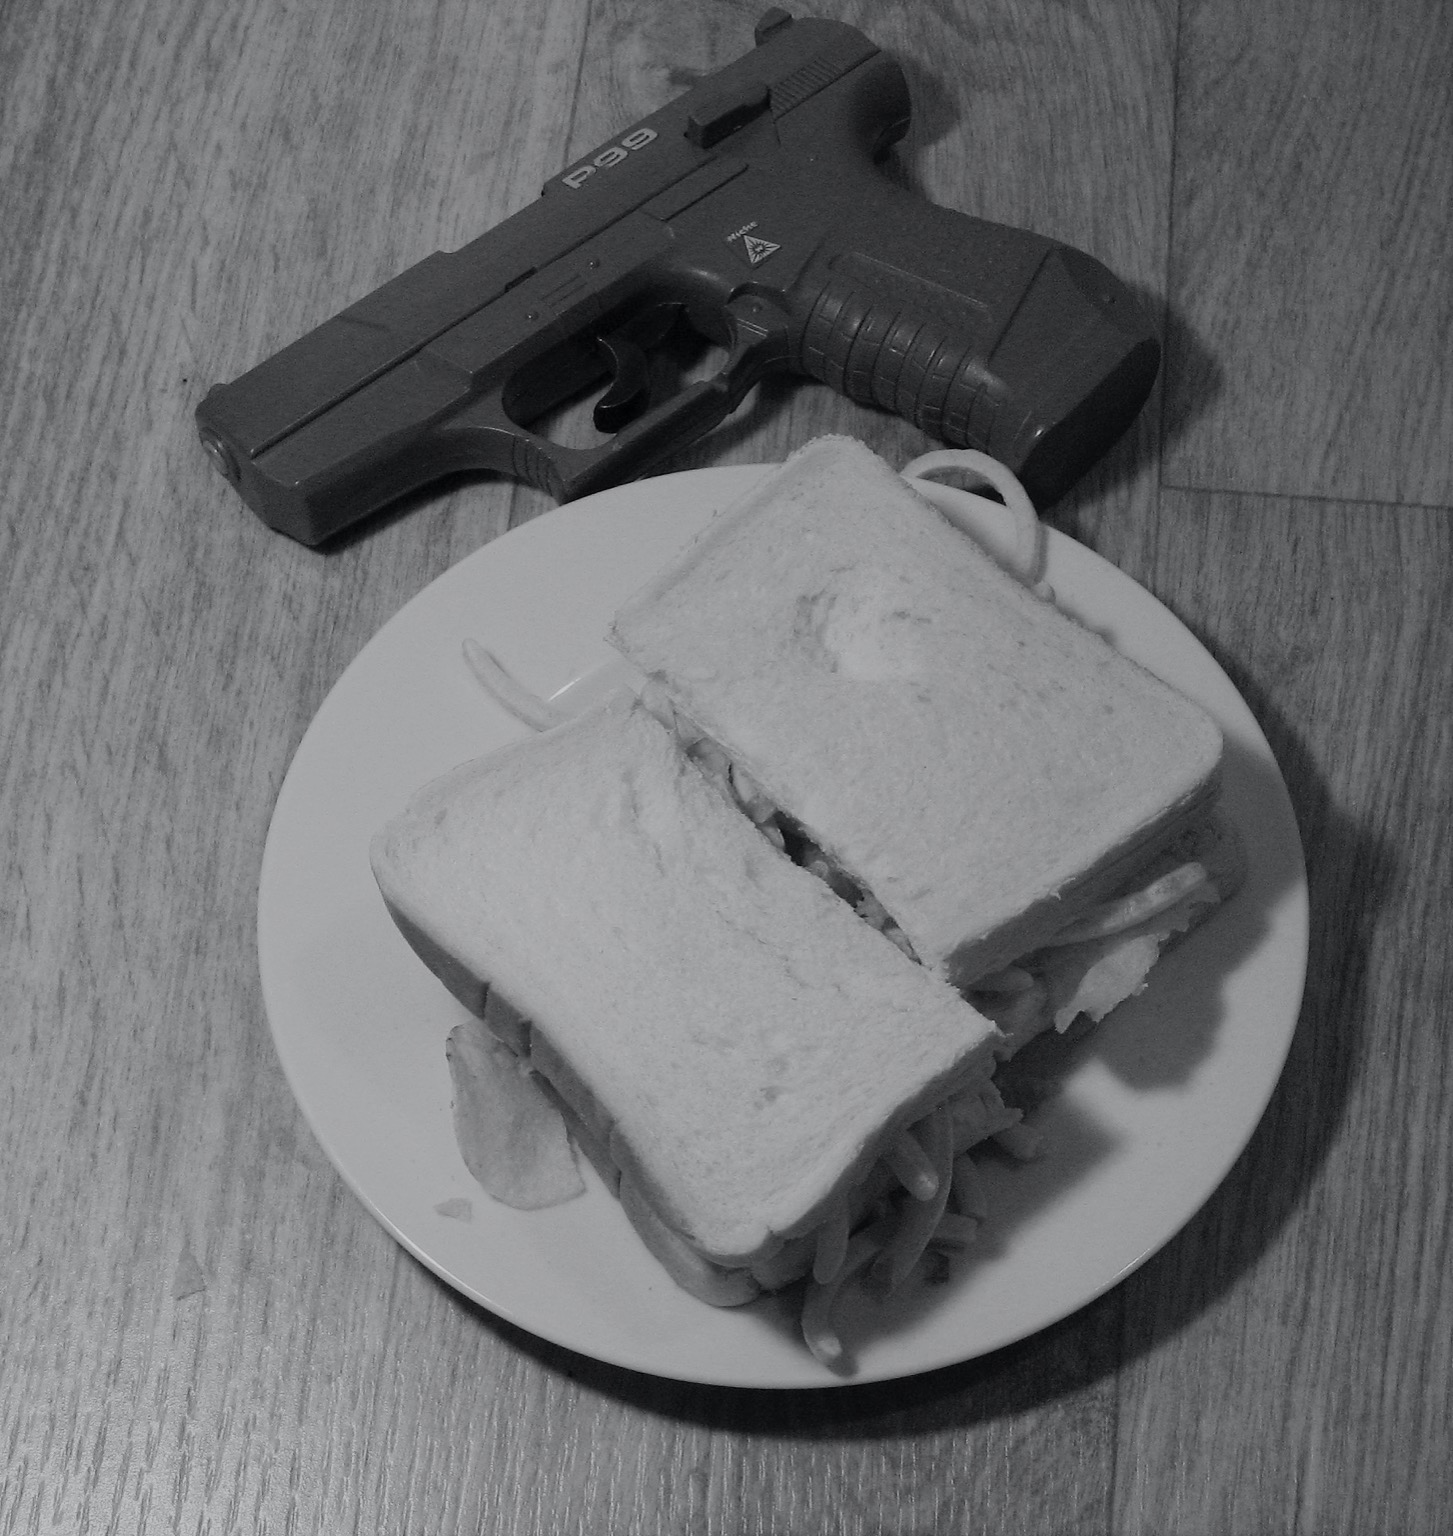 Halved crisps/French Fries sandwich with a toy gun